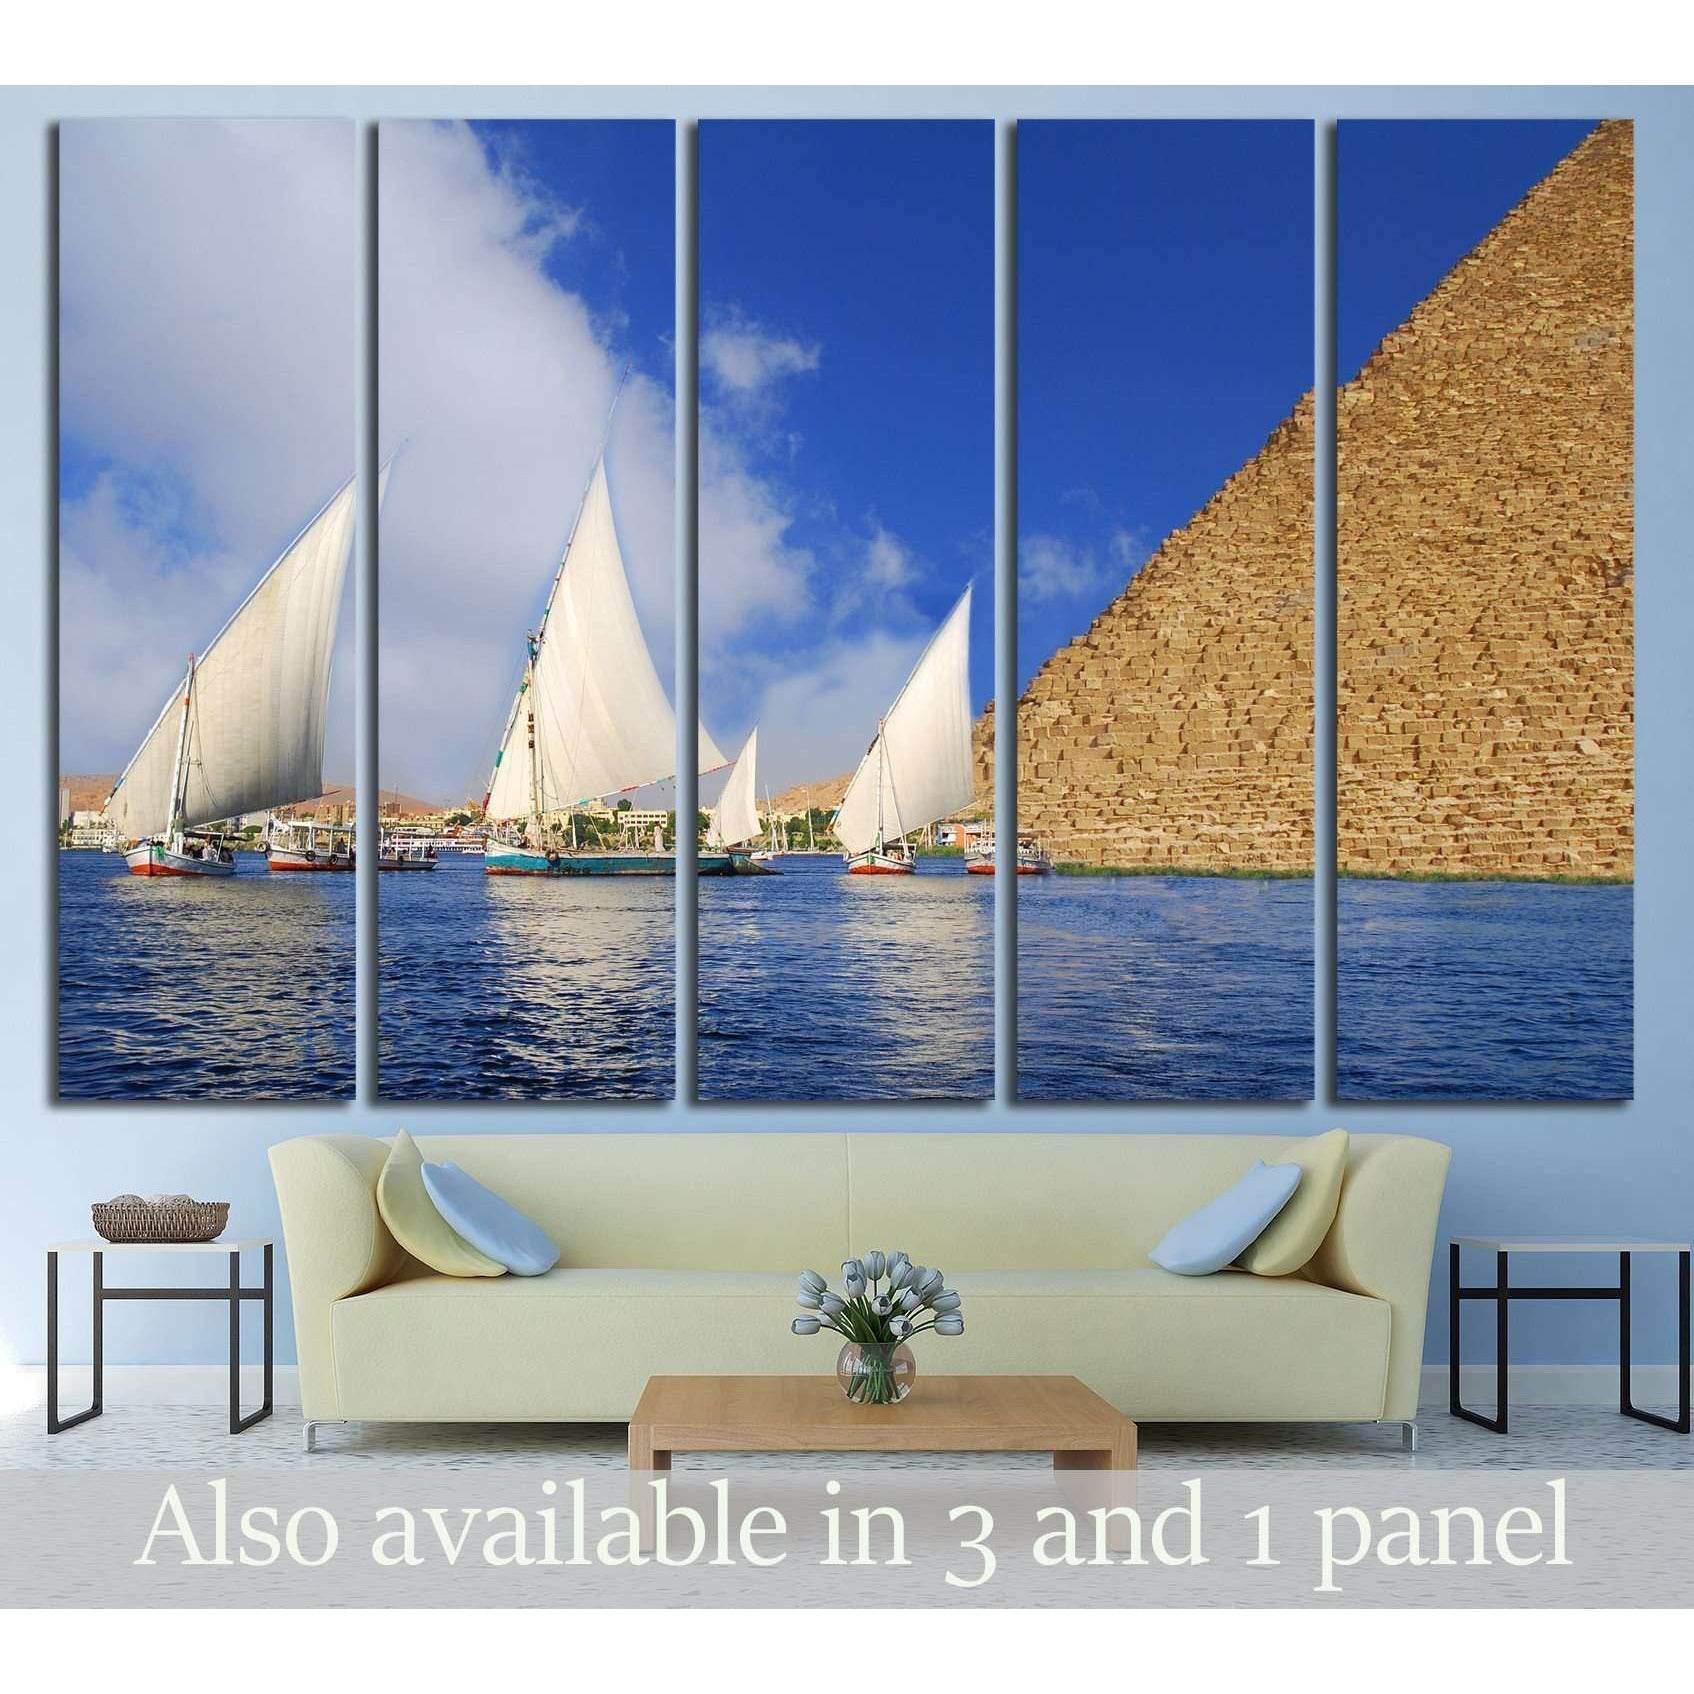 Egyptian Abstraction - Falukas on the Nile and Egyptian Pyramid fantasy №2136 Ready to Hang Canvas Print